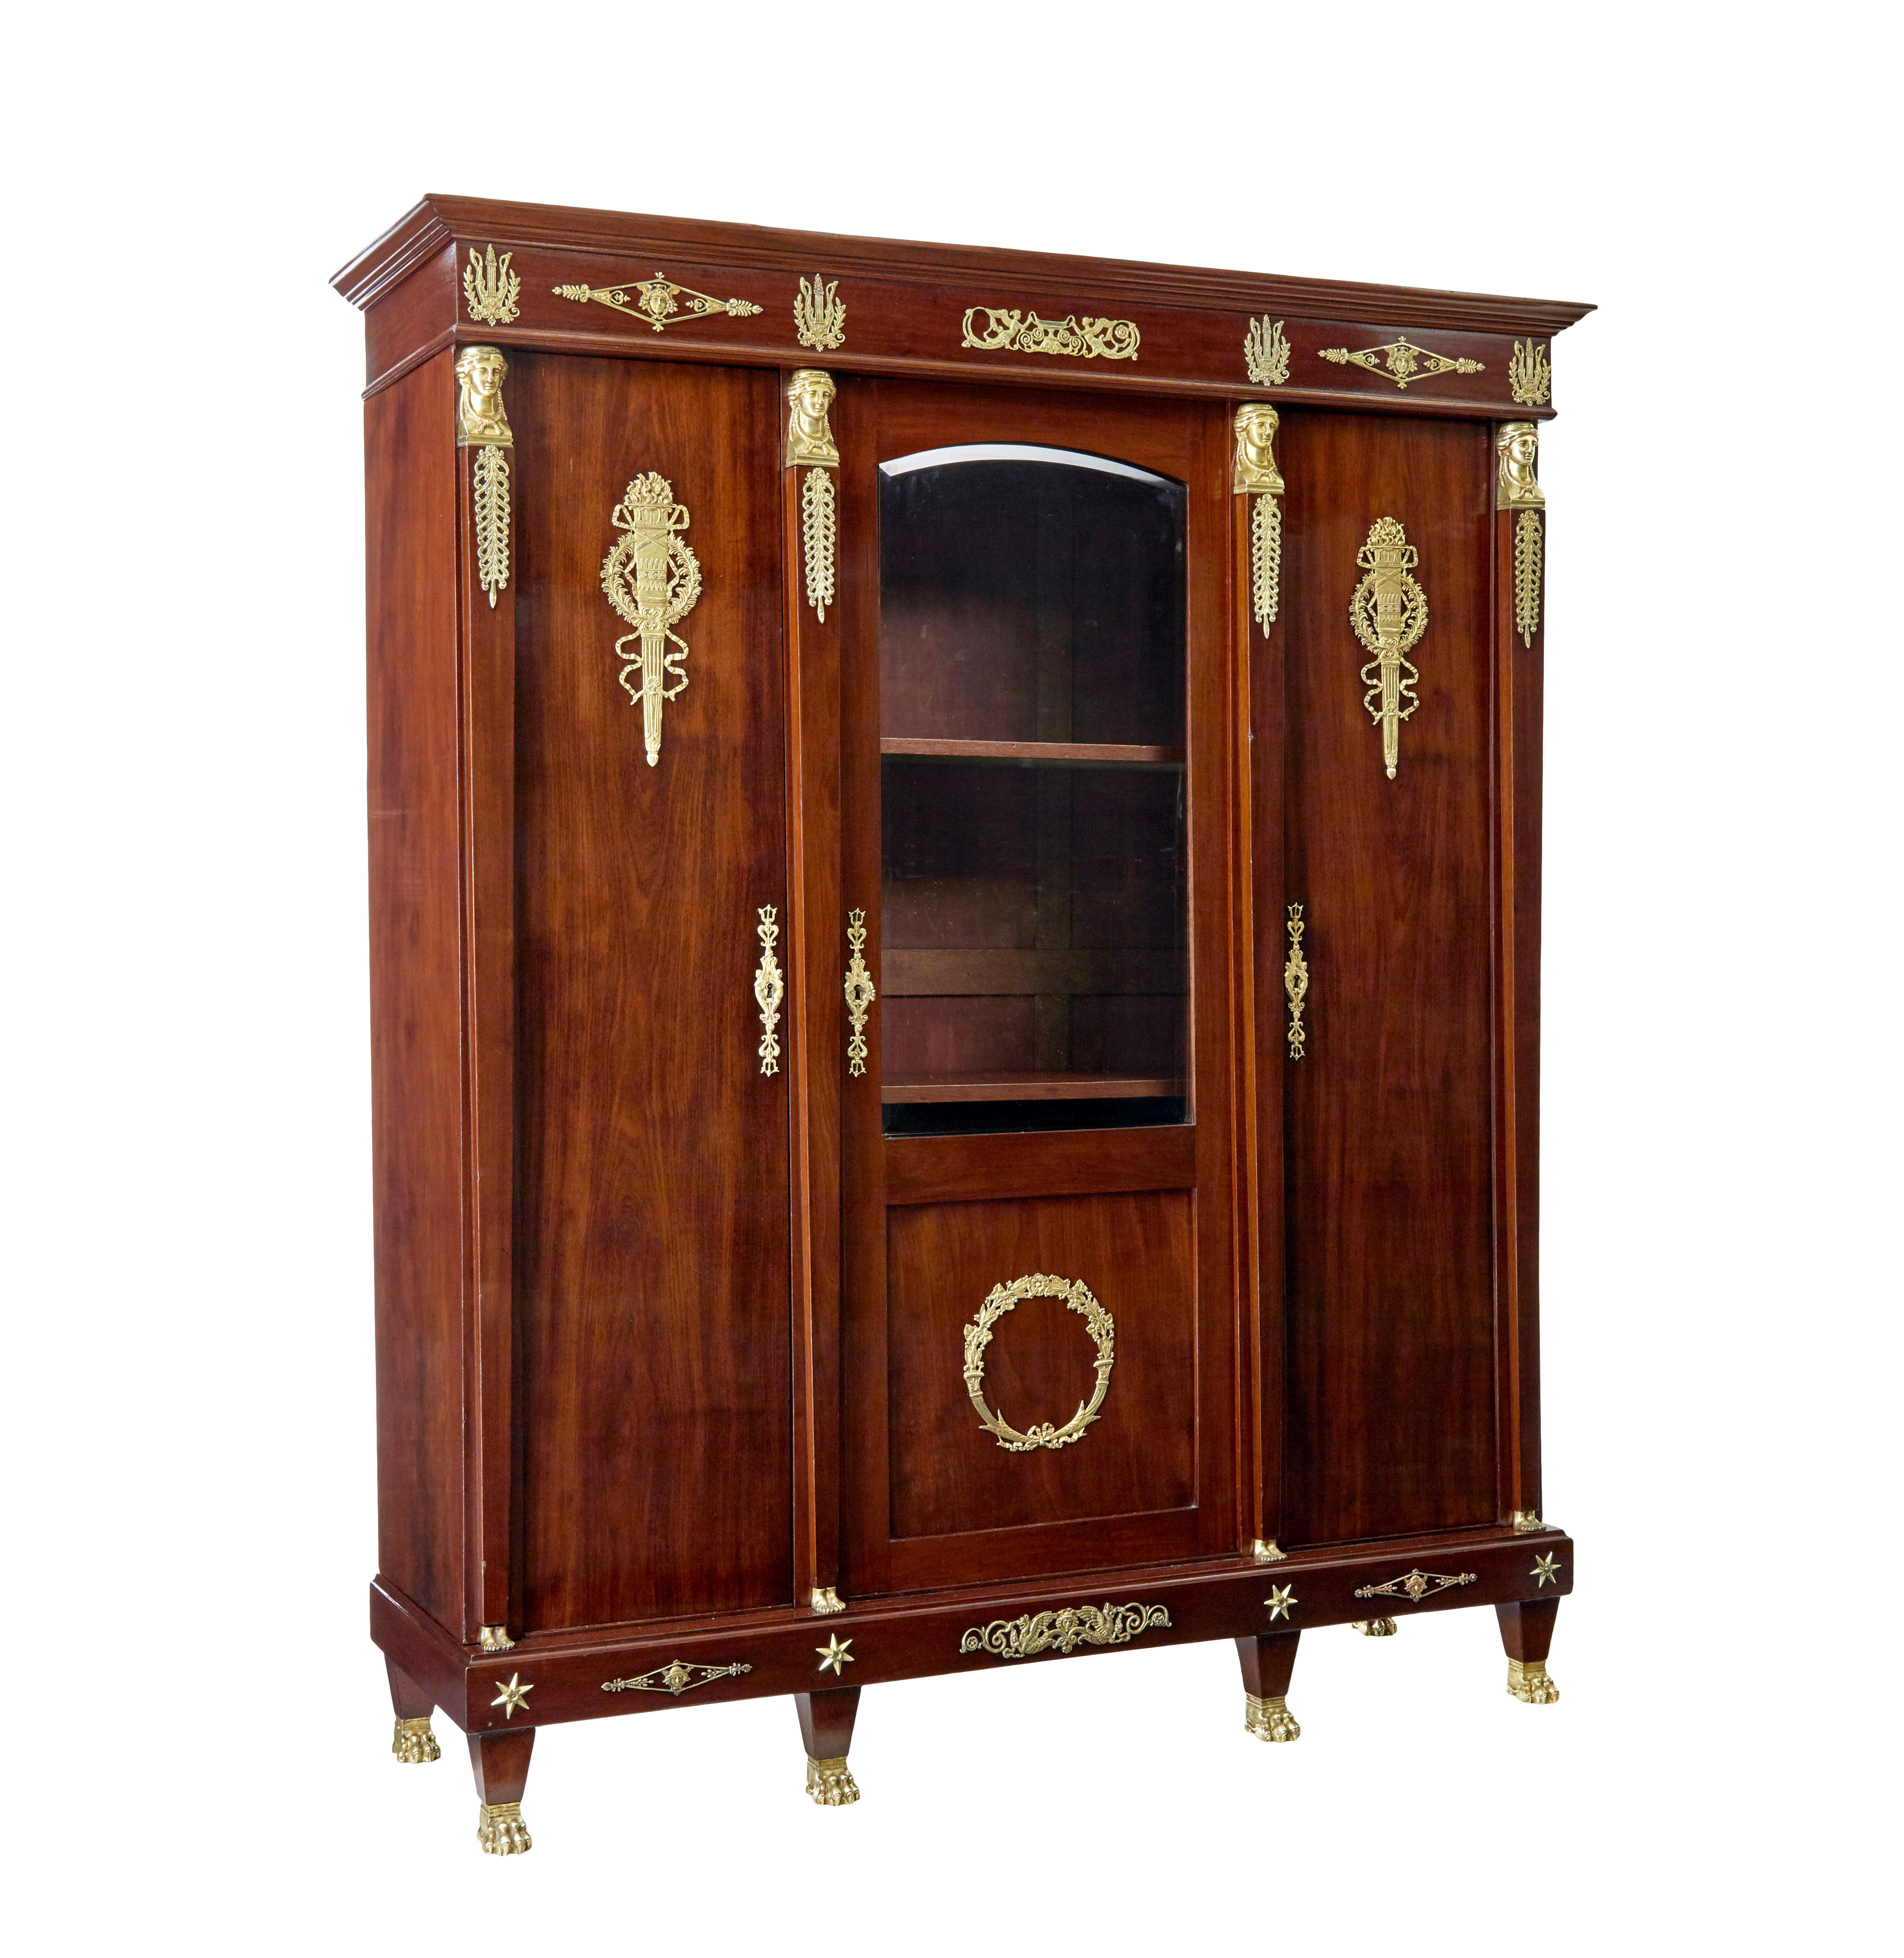 Fine quality french empire revival mahogany cabinet circa 1890.

Generous proportions and as with all furniture of this scale and period it was built to come apart.

Central glazed door with ormolu wreath mount, flanked either side by a single door